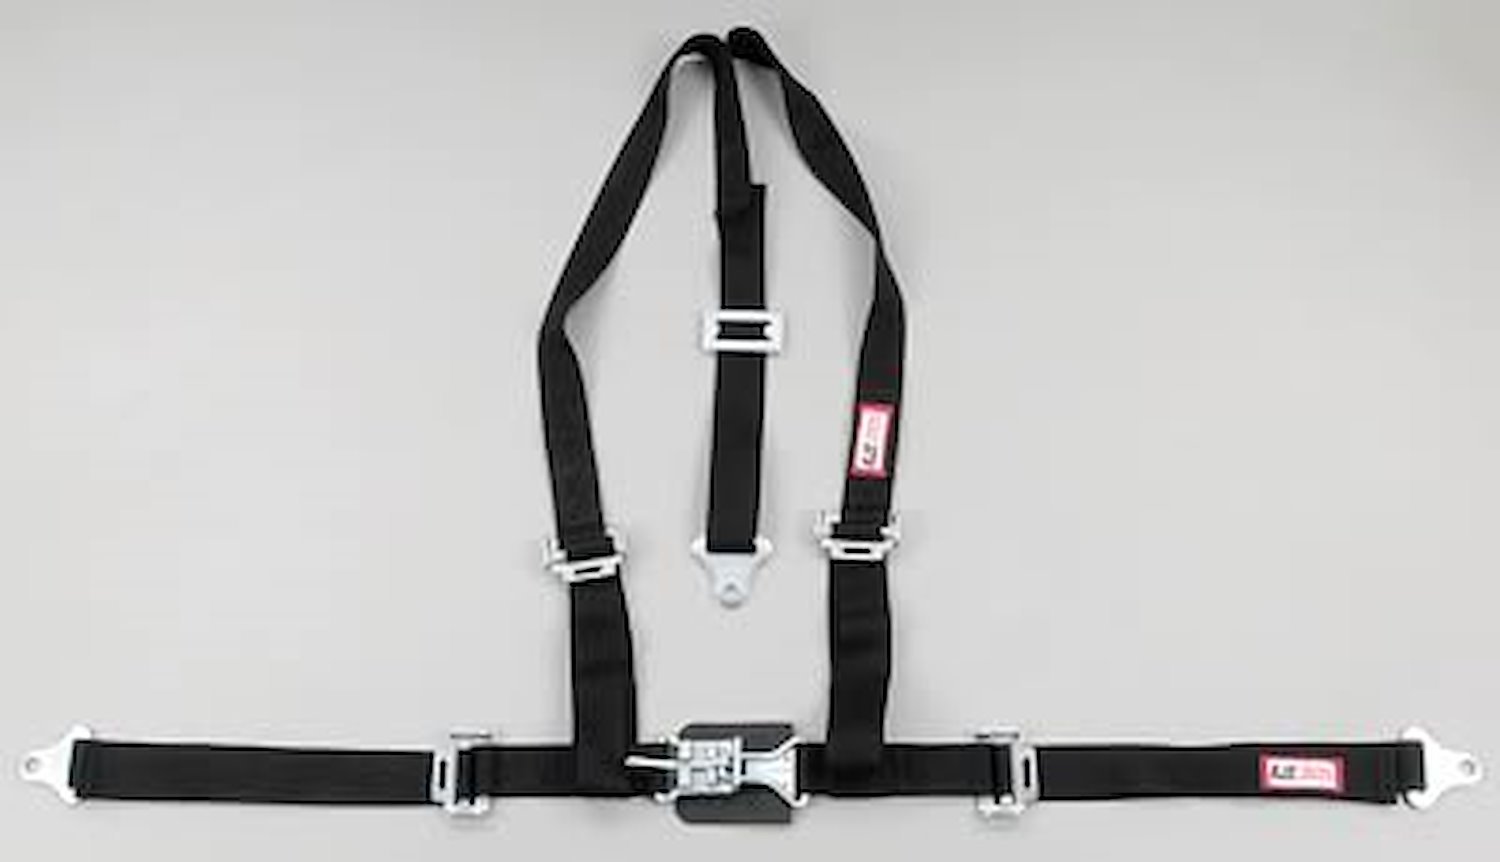 NON-SFI L&L HARNESS 2 PULL UP Lap Belt w/Adjuster SNAP 2 S.H. Individual ROLL BAR MOUNT w/STERNUM STRAP WRAP/SNAP RED